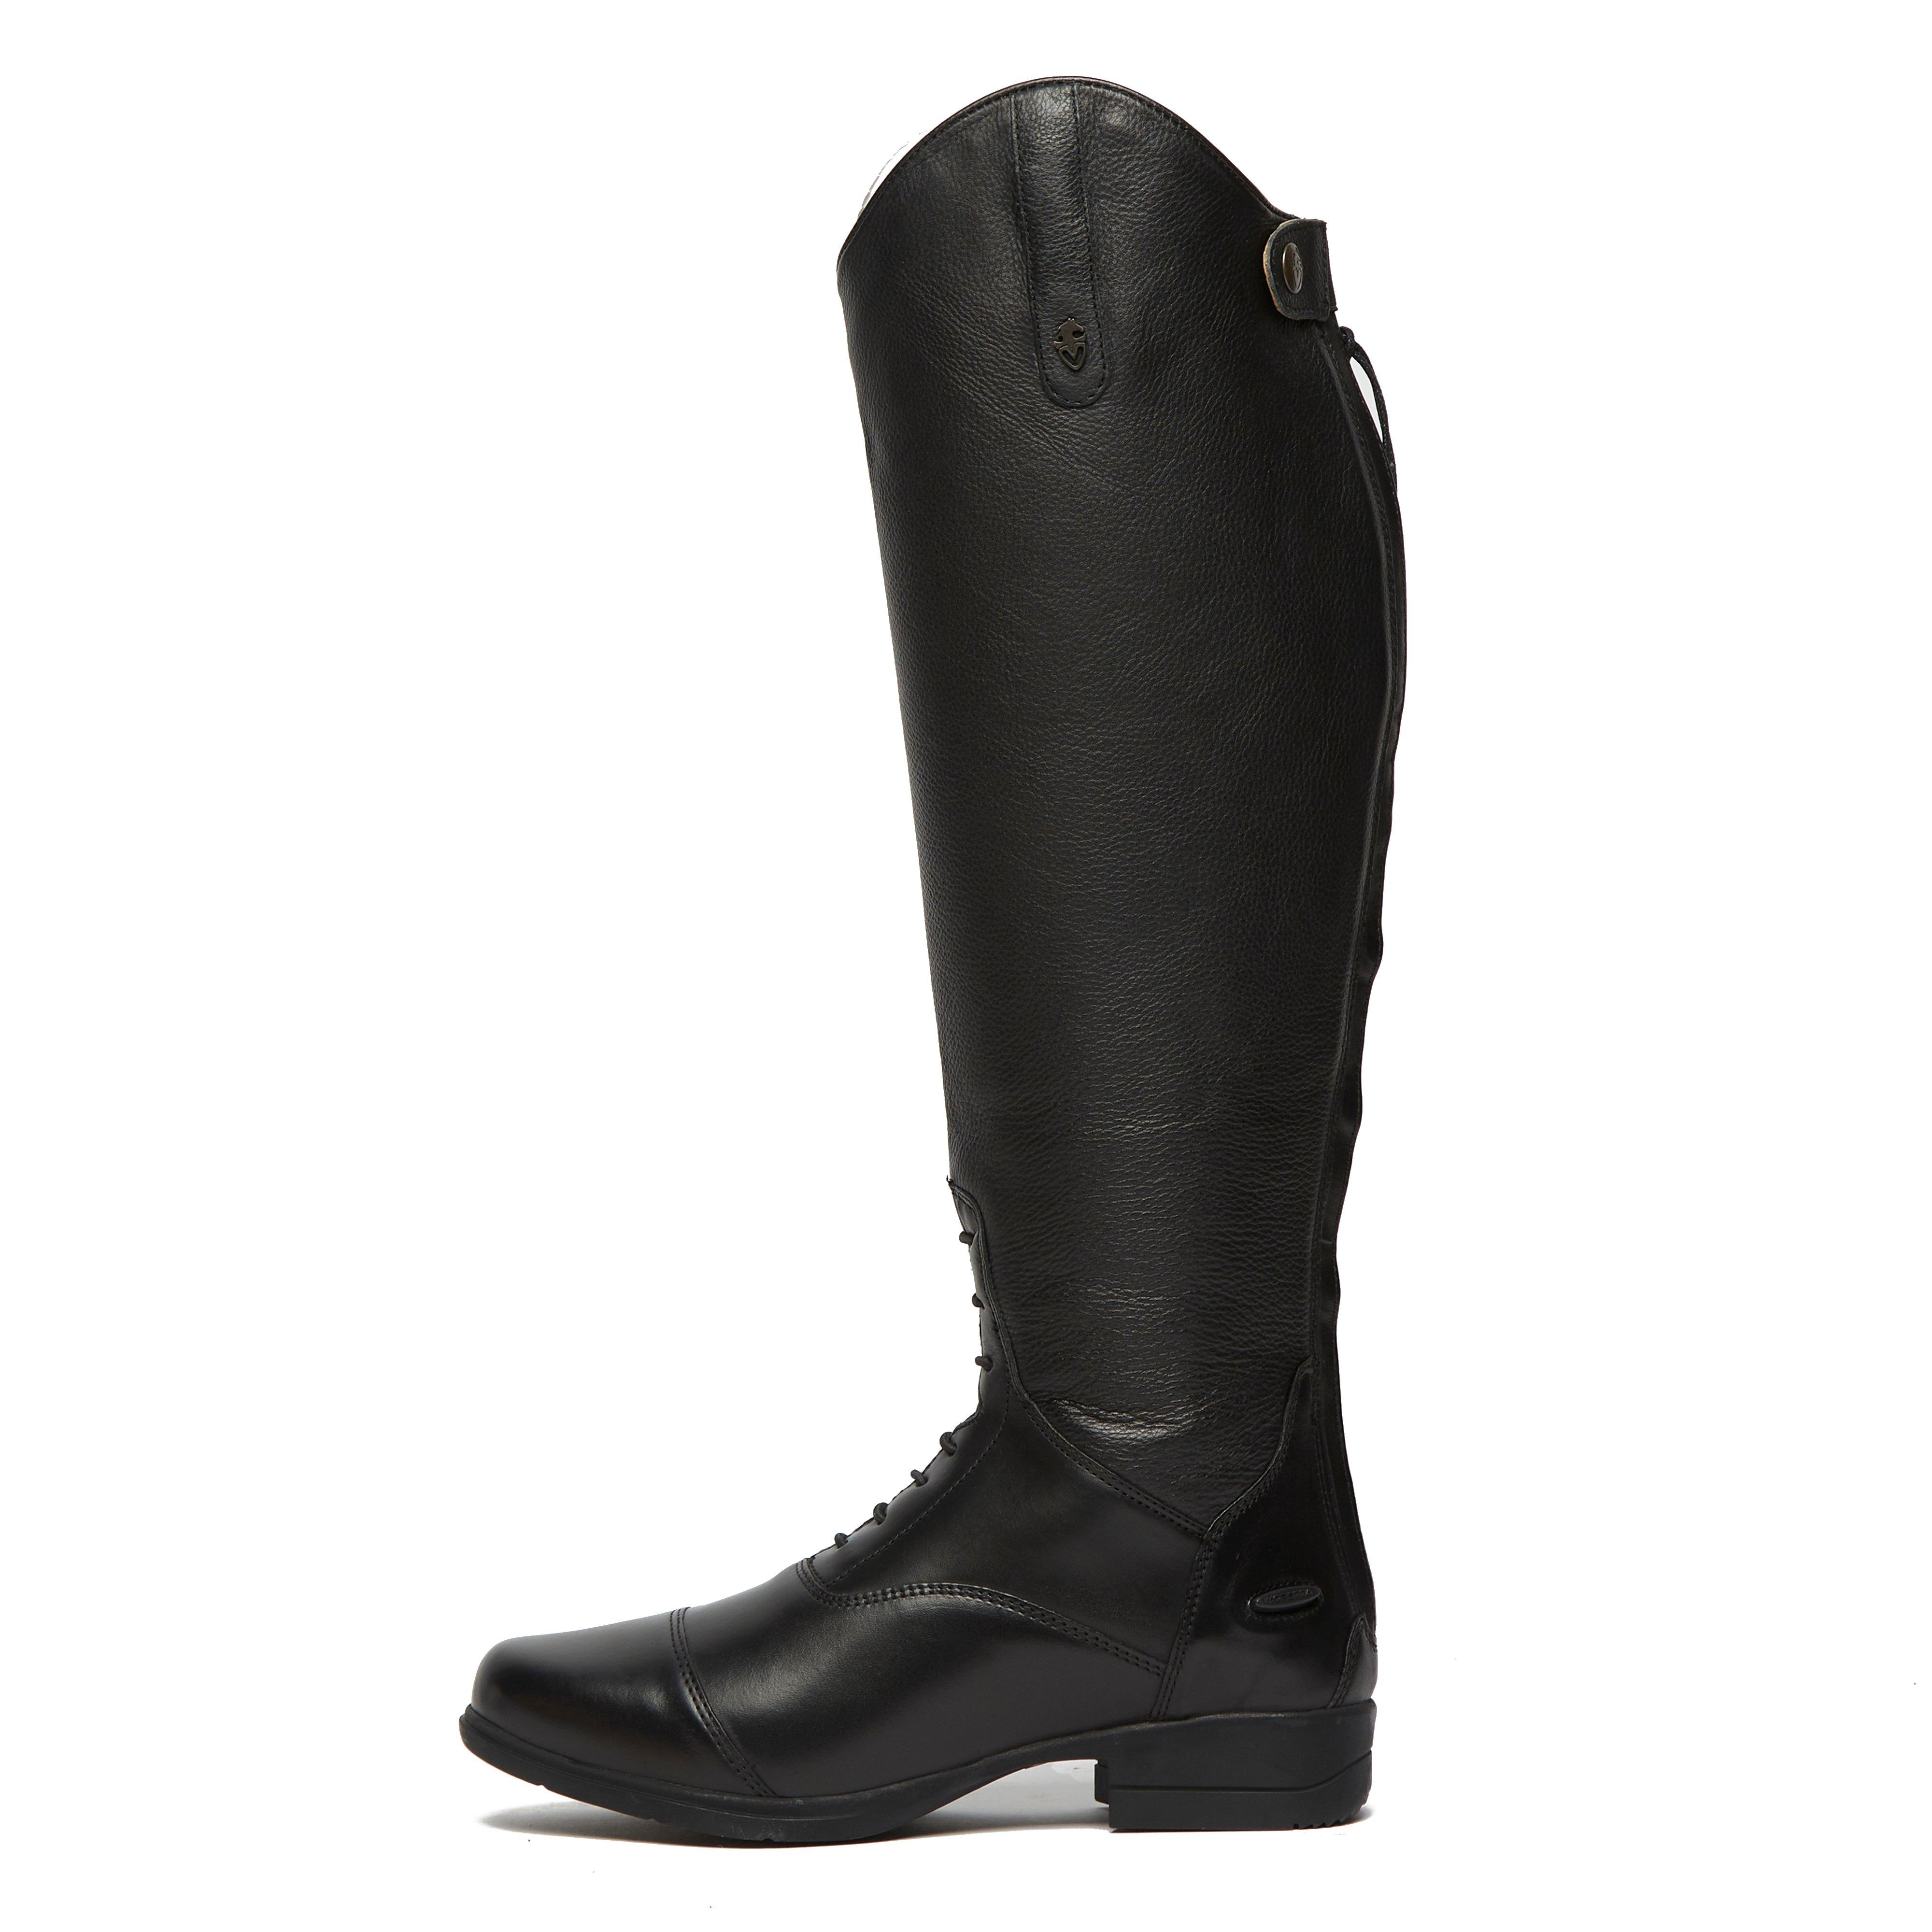 Womens Gianna Leather Field Riding Boots Black